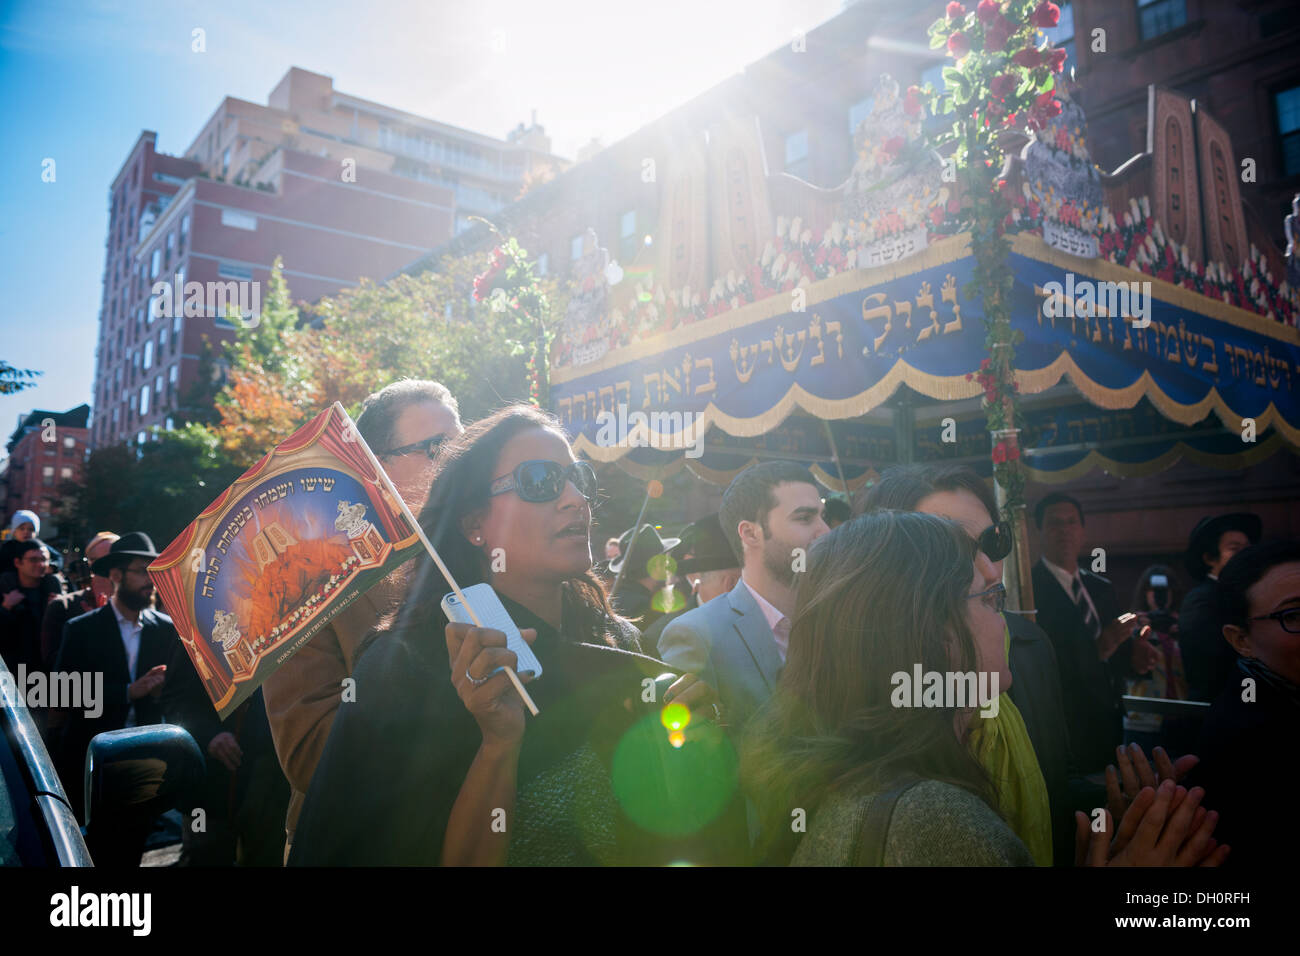 Members and friends of the Chabad of Harlem celebrate the completion of their Sefer Torah Stock Photo